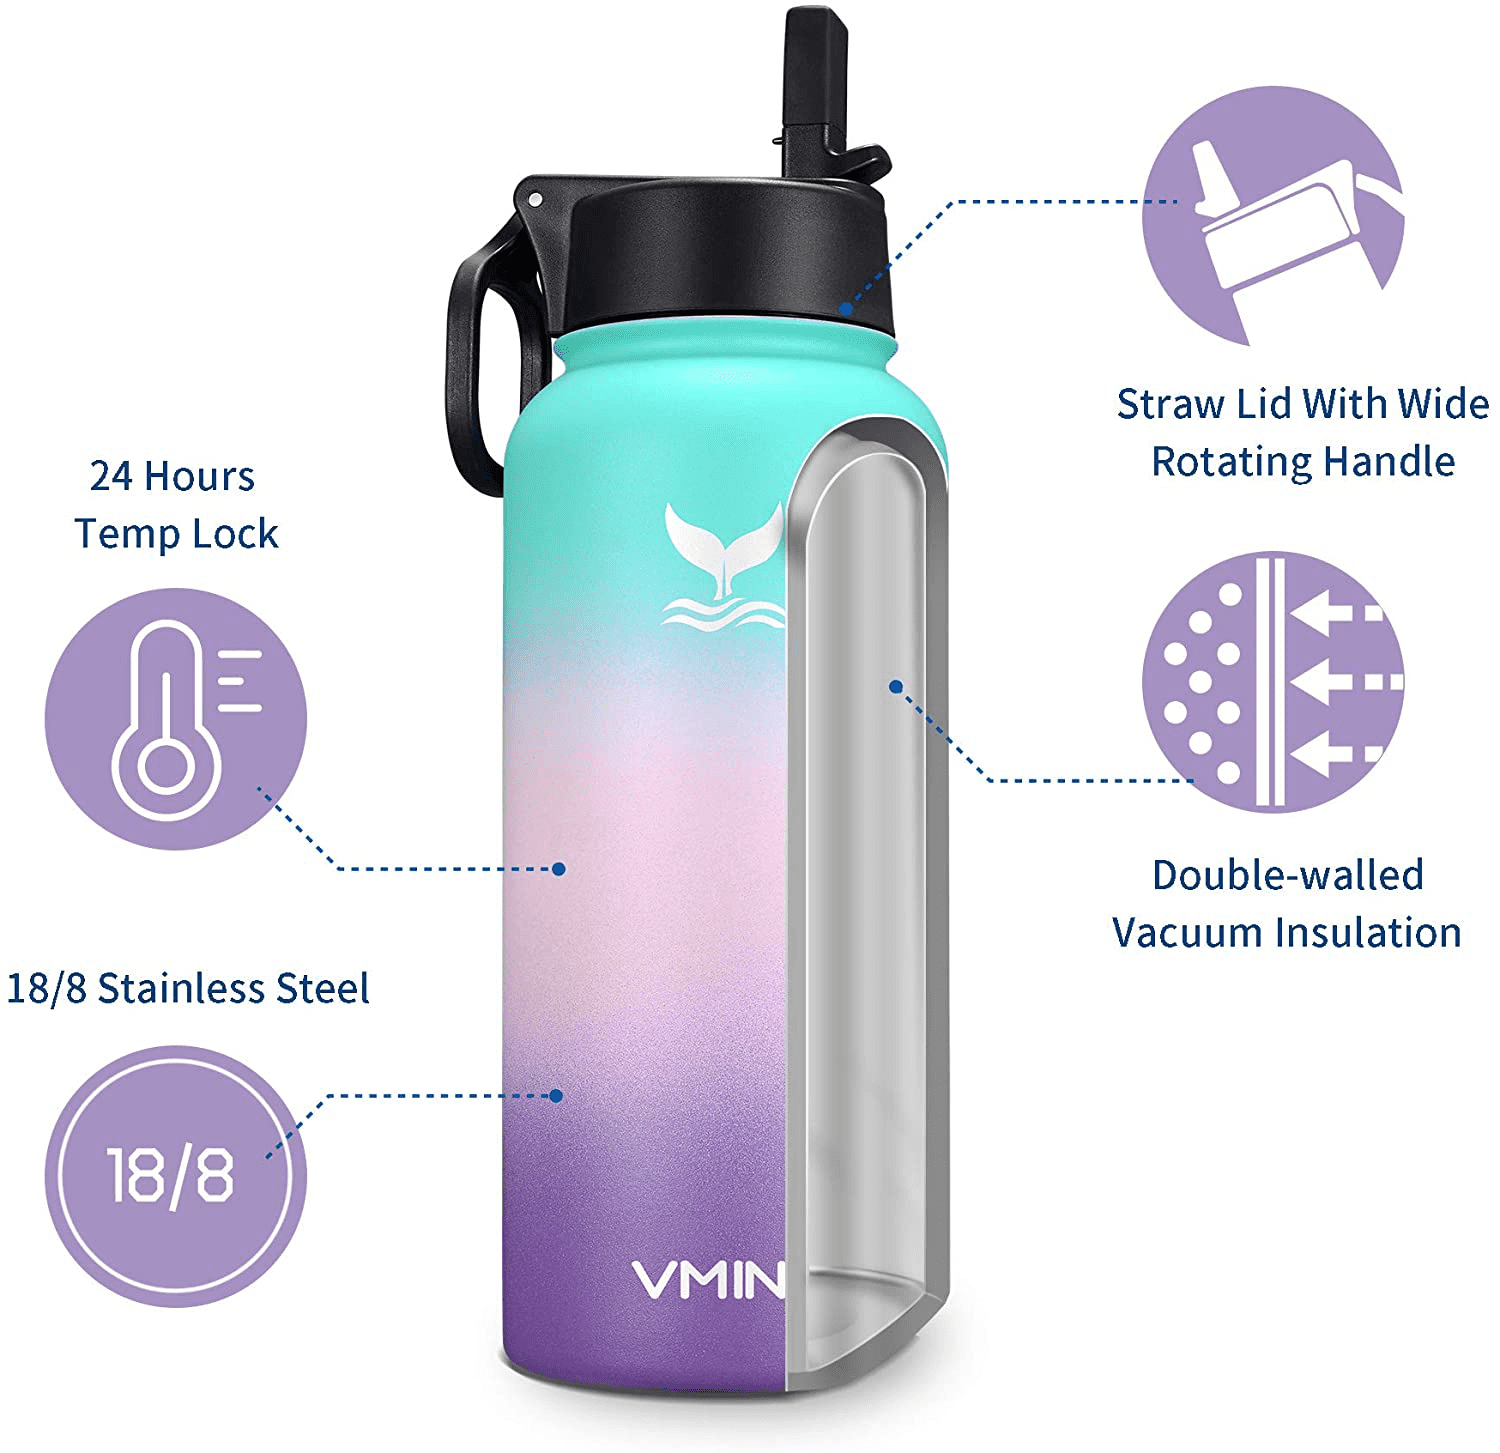 Double Wall Vacuum Insulated 18/8 Stainless Steel Vmini Water Bottle New Straw Lid with Wide Handle Pink, 32 oz Wide Mouth